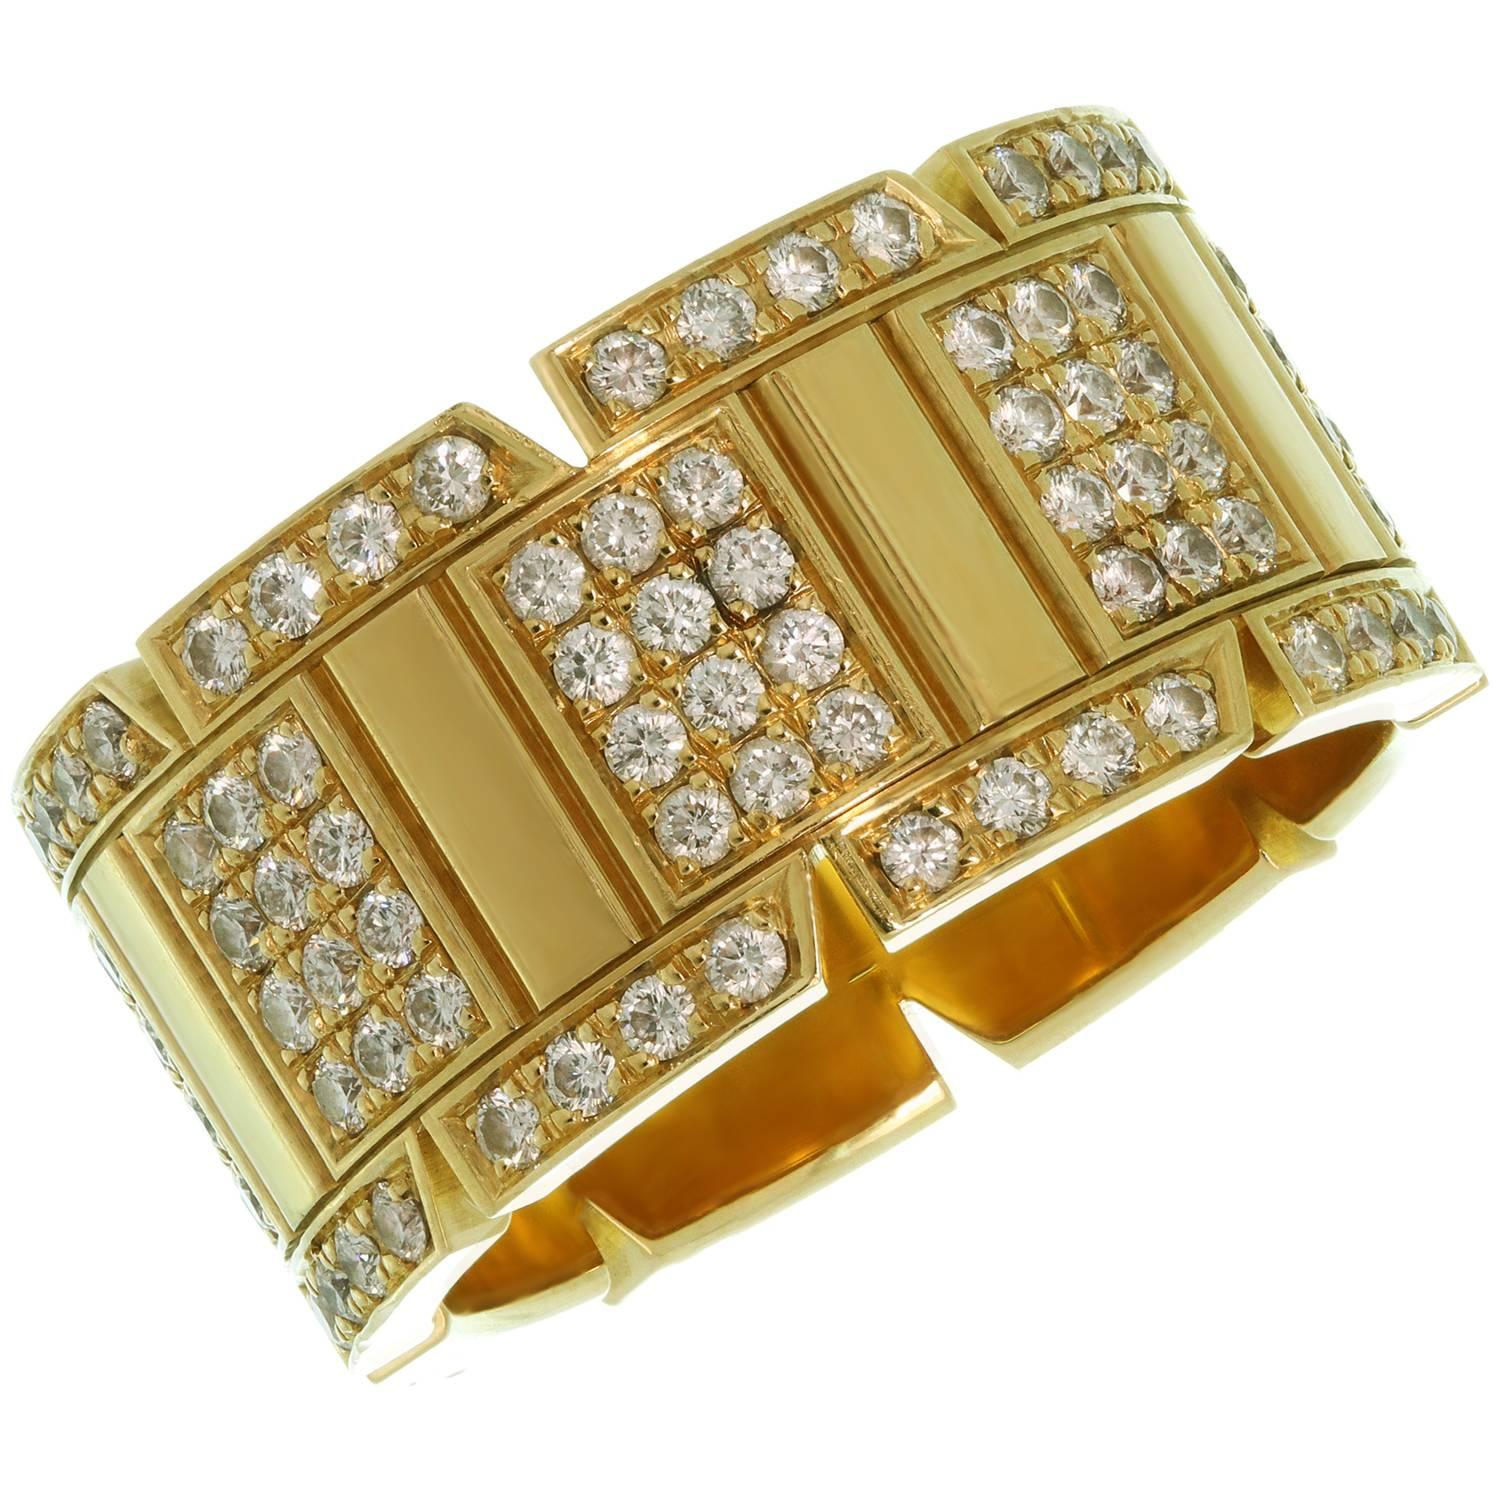 Cartier Tank Francaise Diamond Yellow Gold Large Band Ring. Size is 8 - EU 57